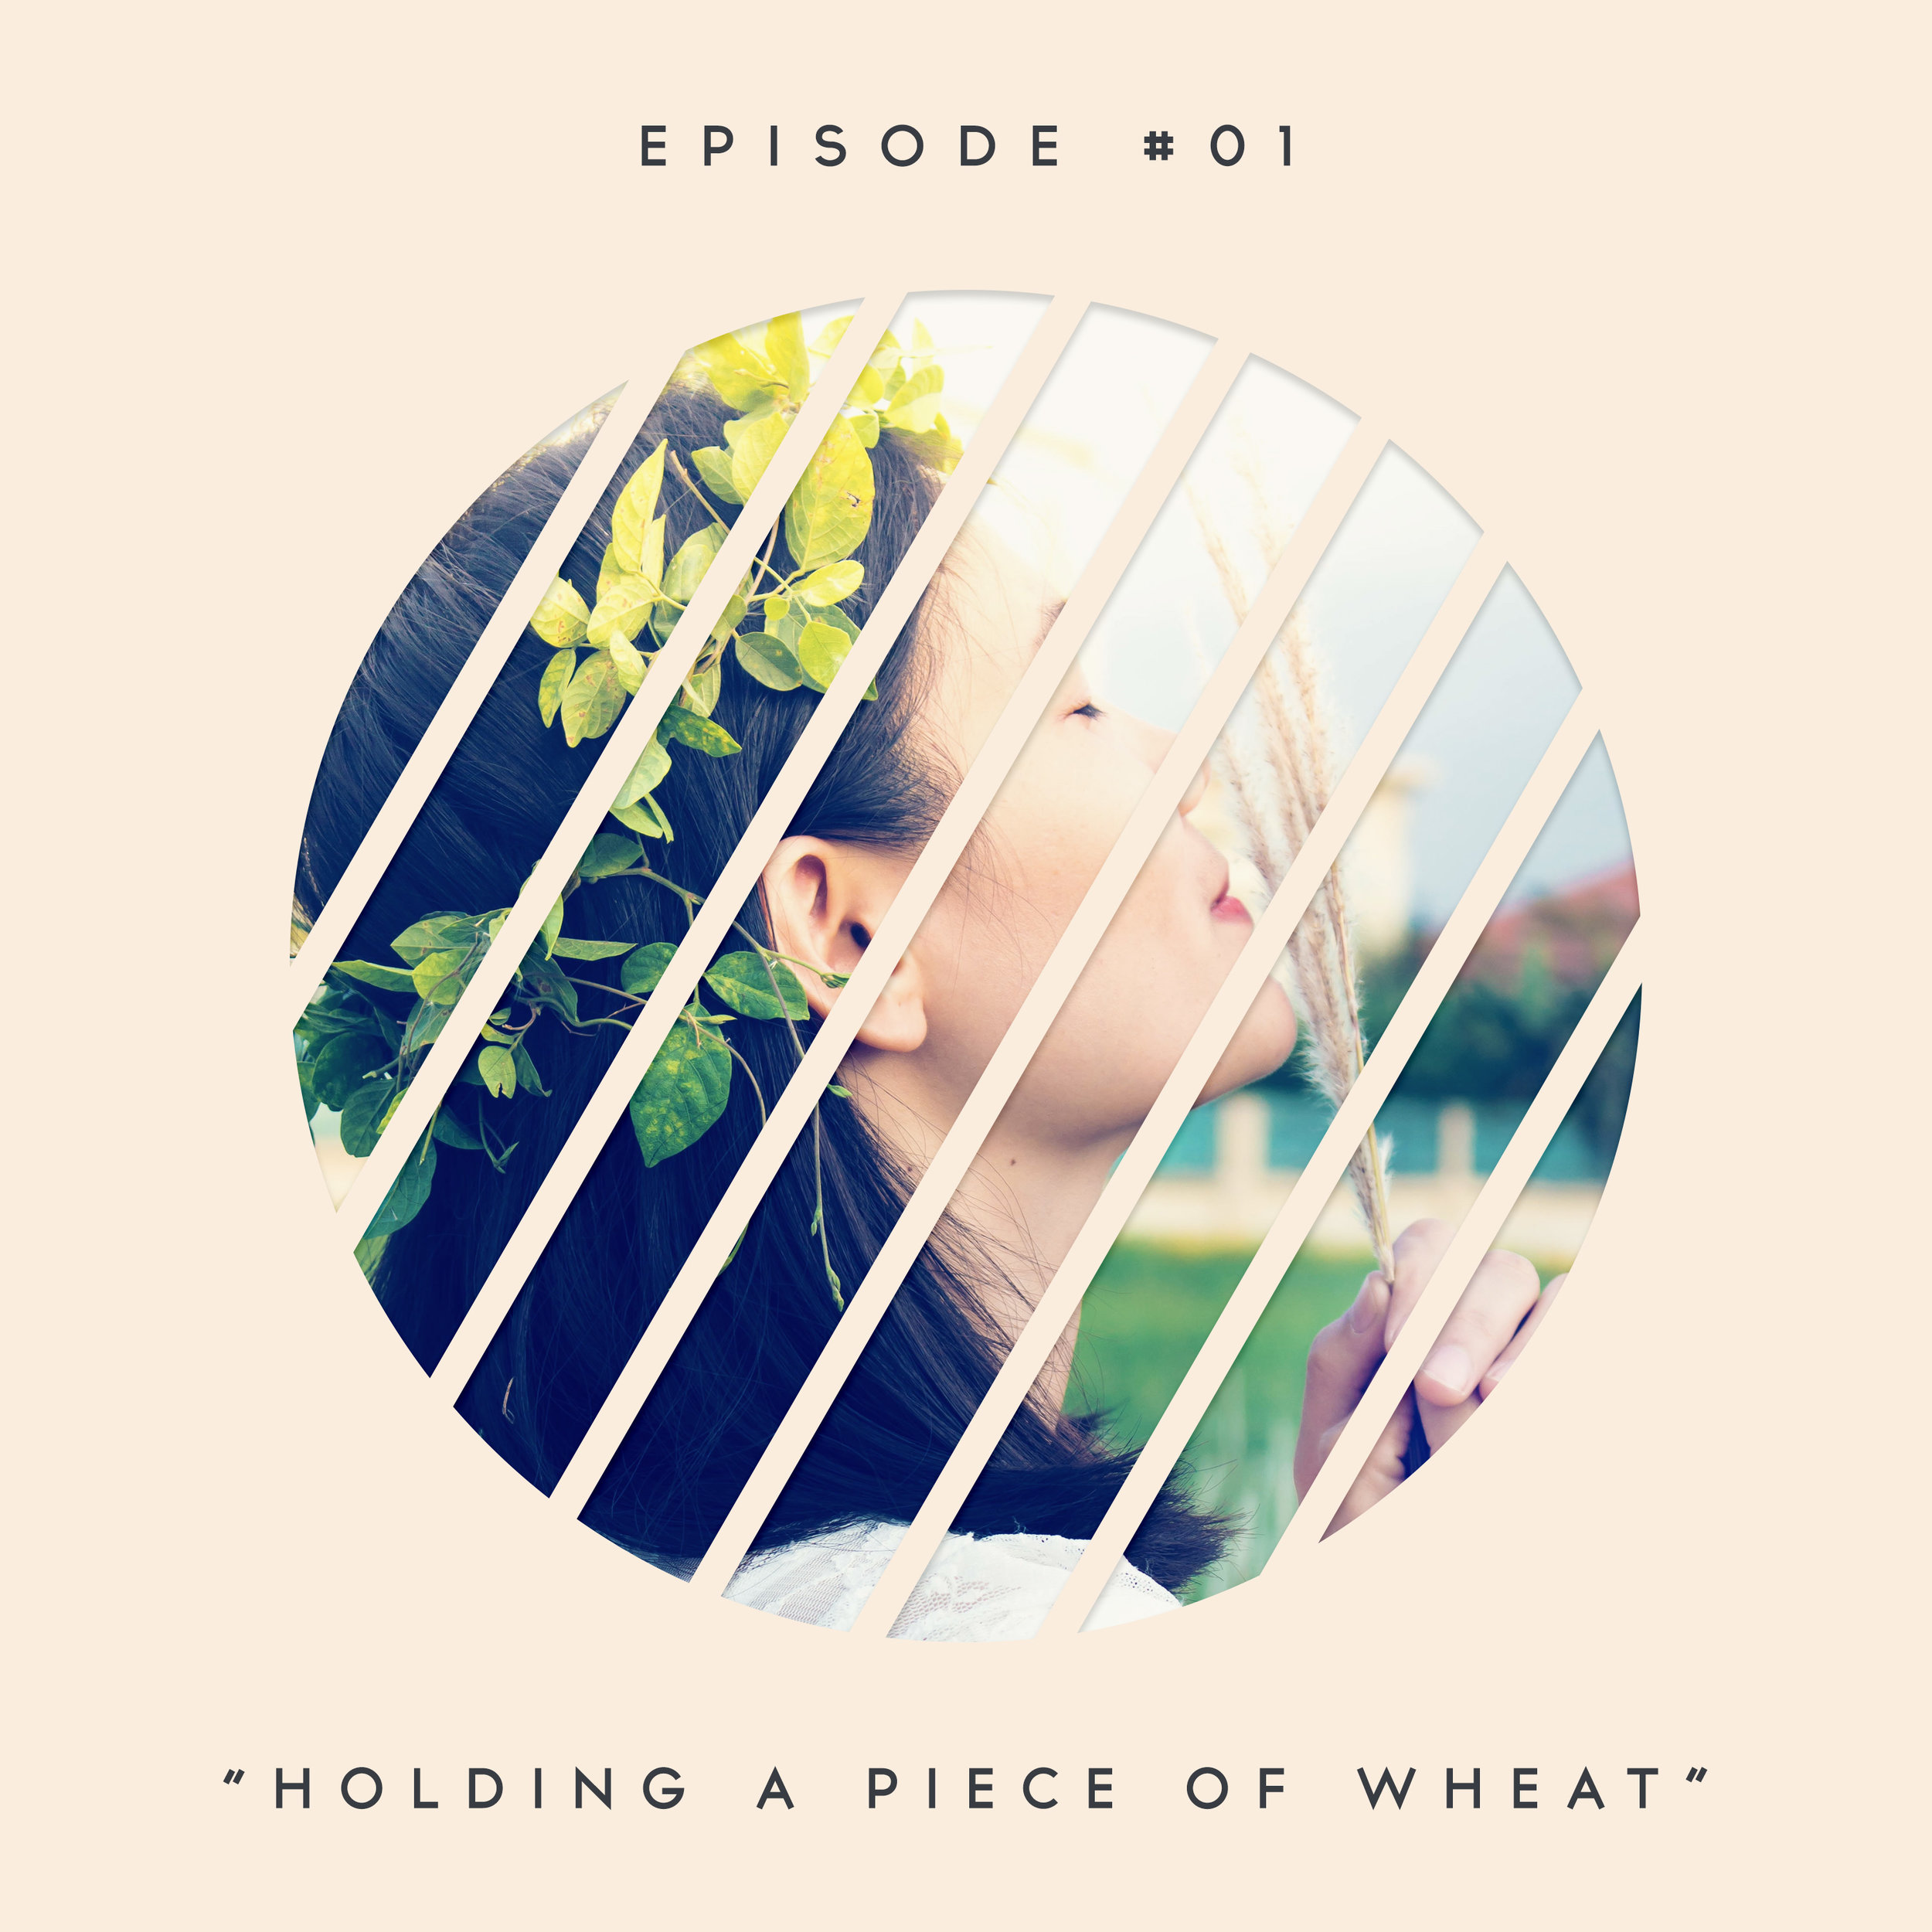 1: Carrying a Piece of Wheat